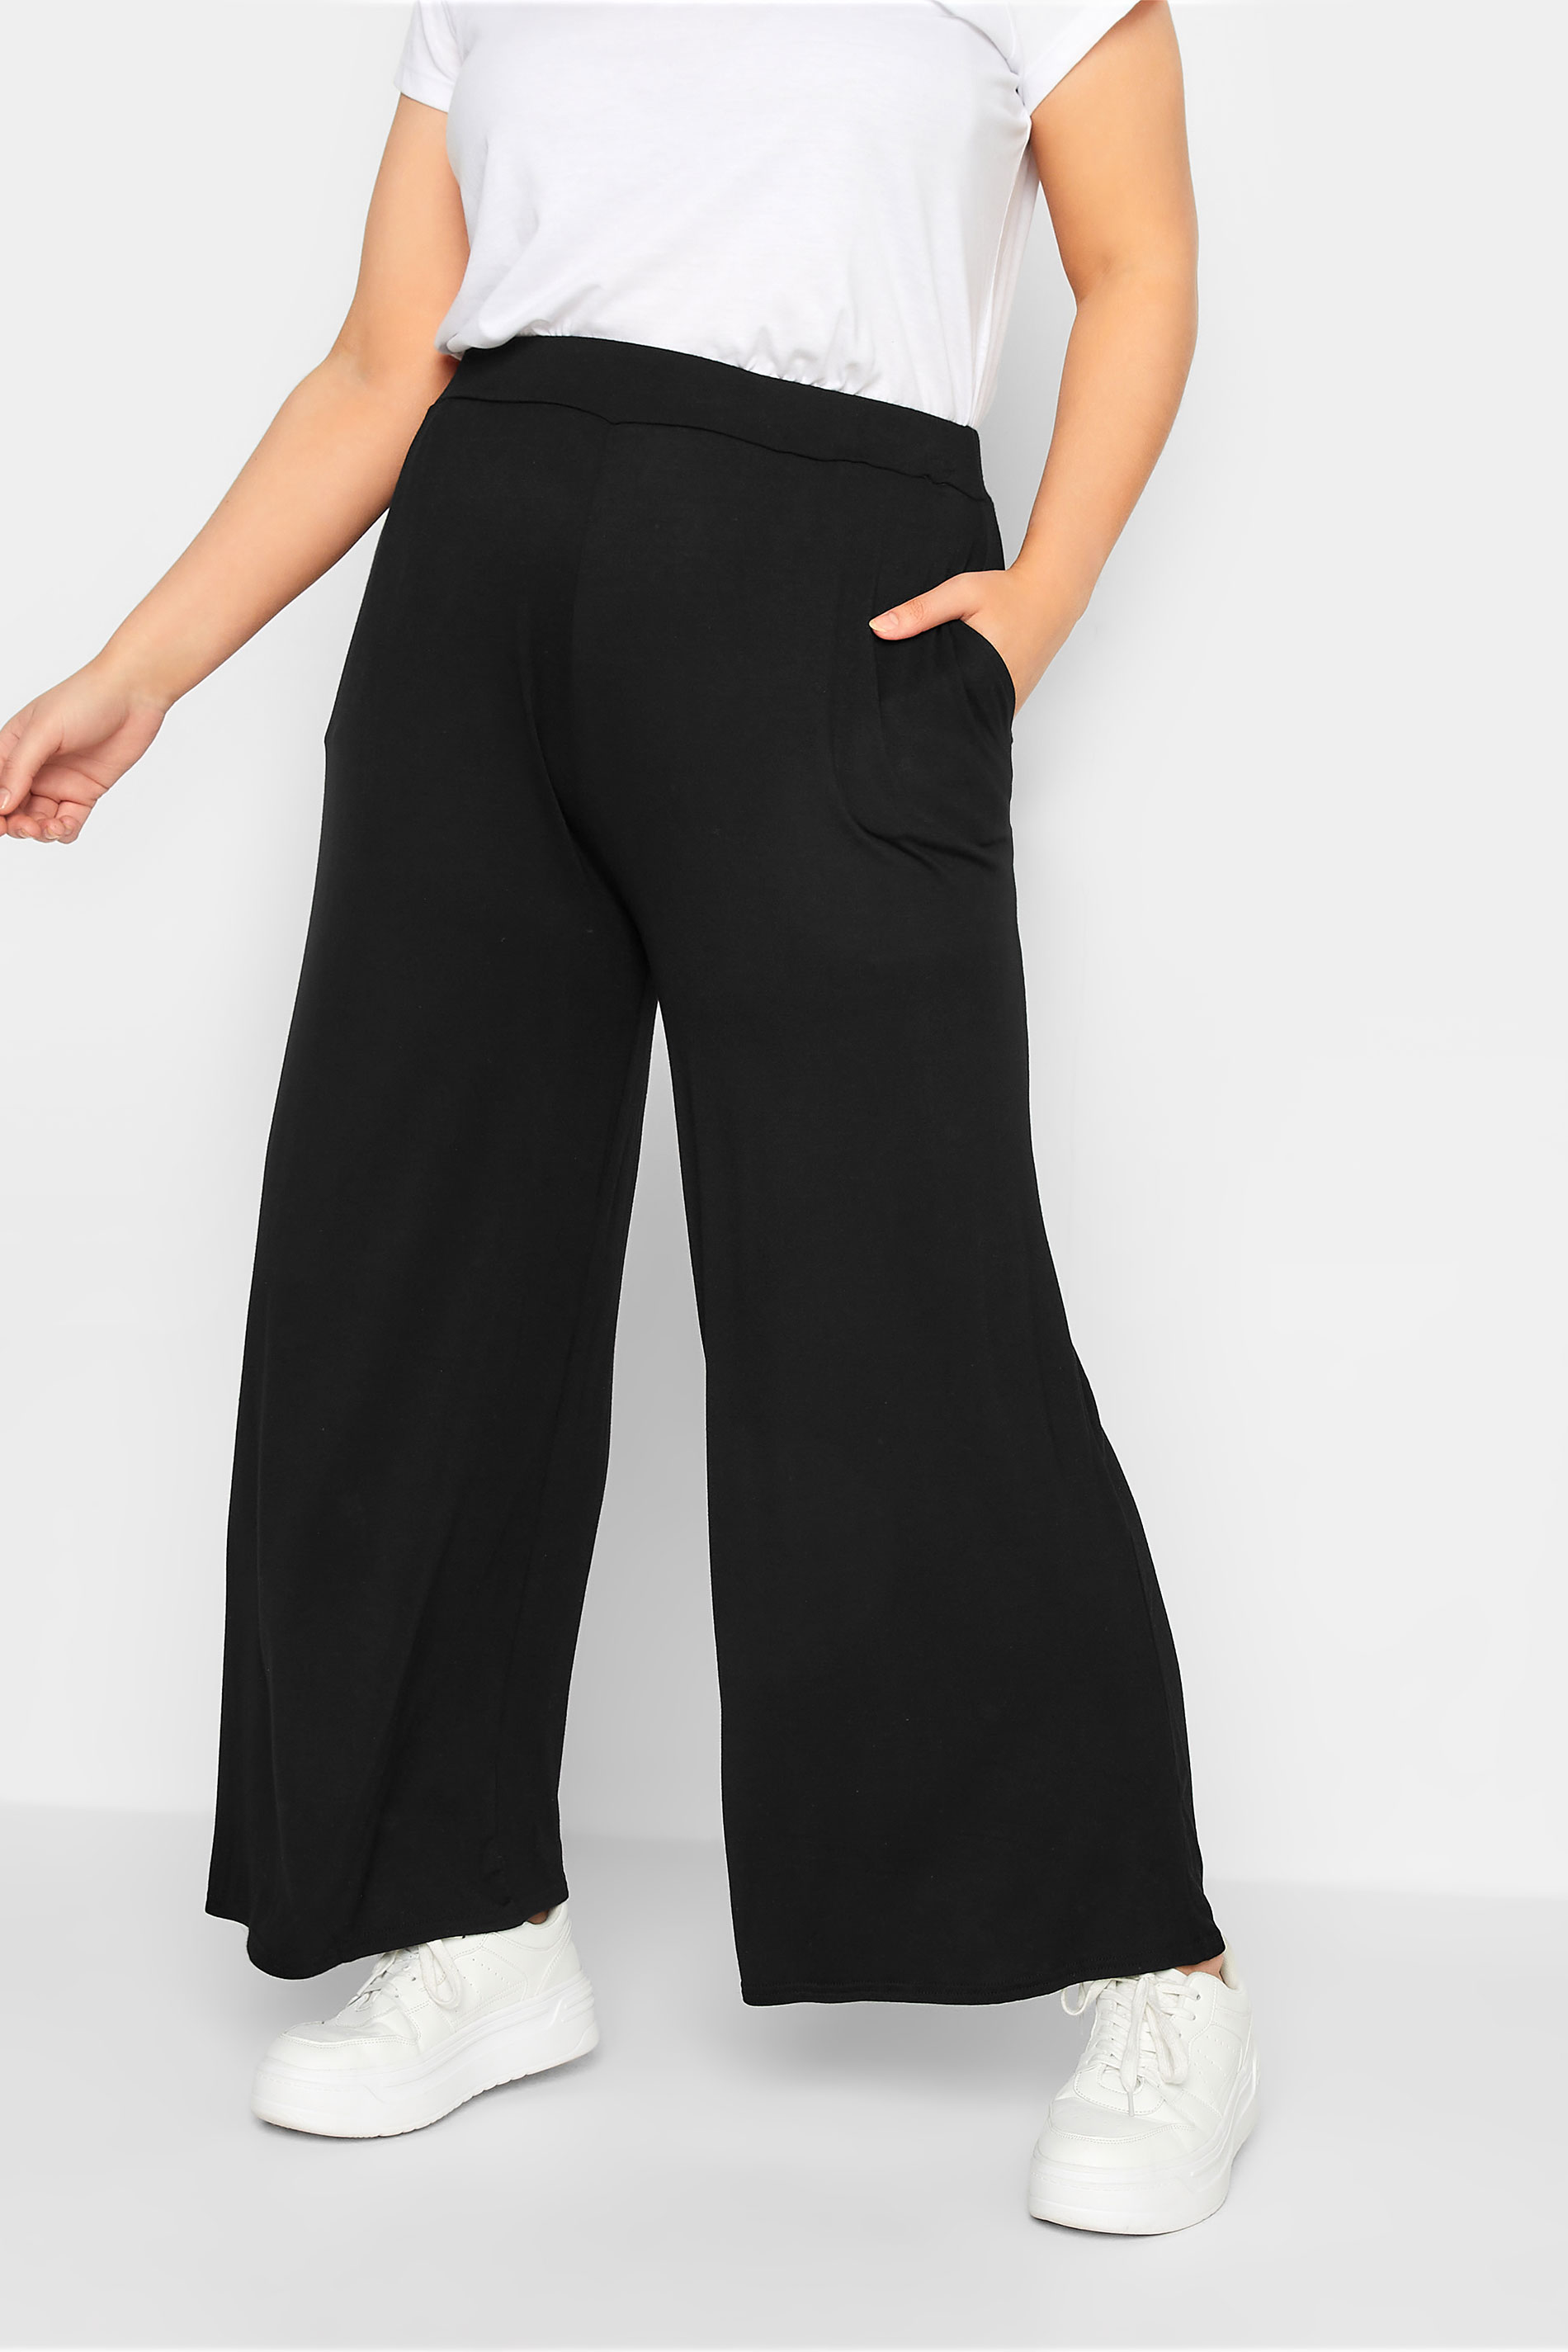 Plus Size Black Wide Leg Stretch Trousers | Yours Clothing 1